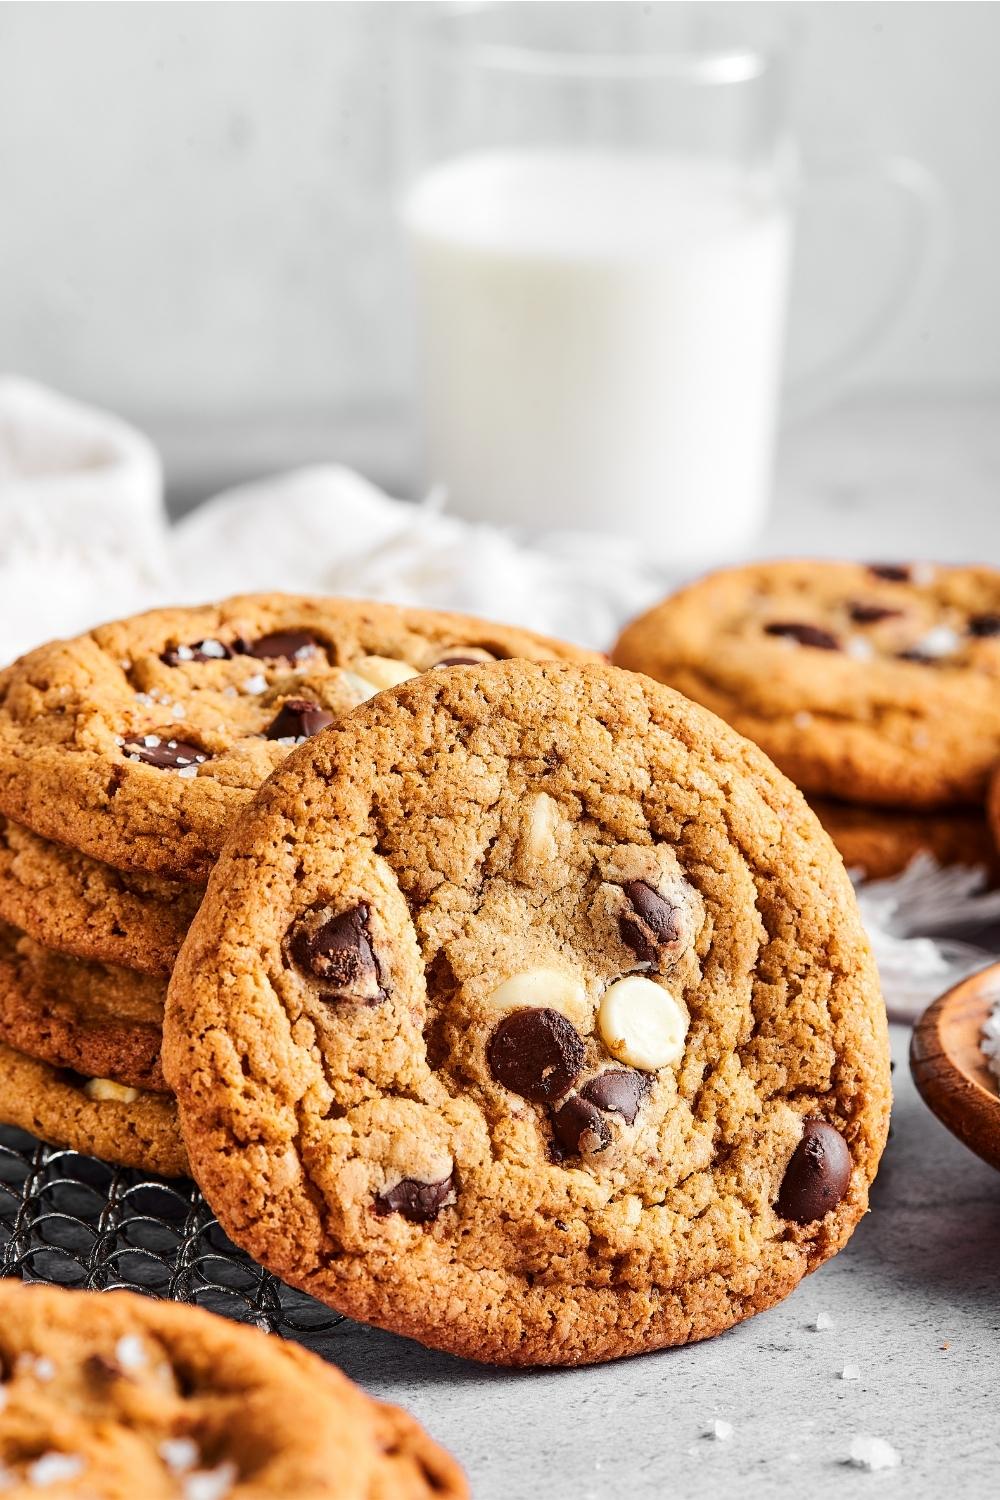 A chocolate chip cookie leaned up against a stack of chocolate chip cookies. Behind them is part of another cookie and a glass of milk.